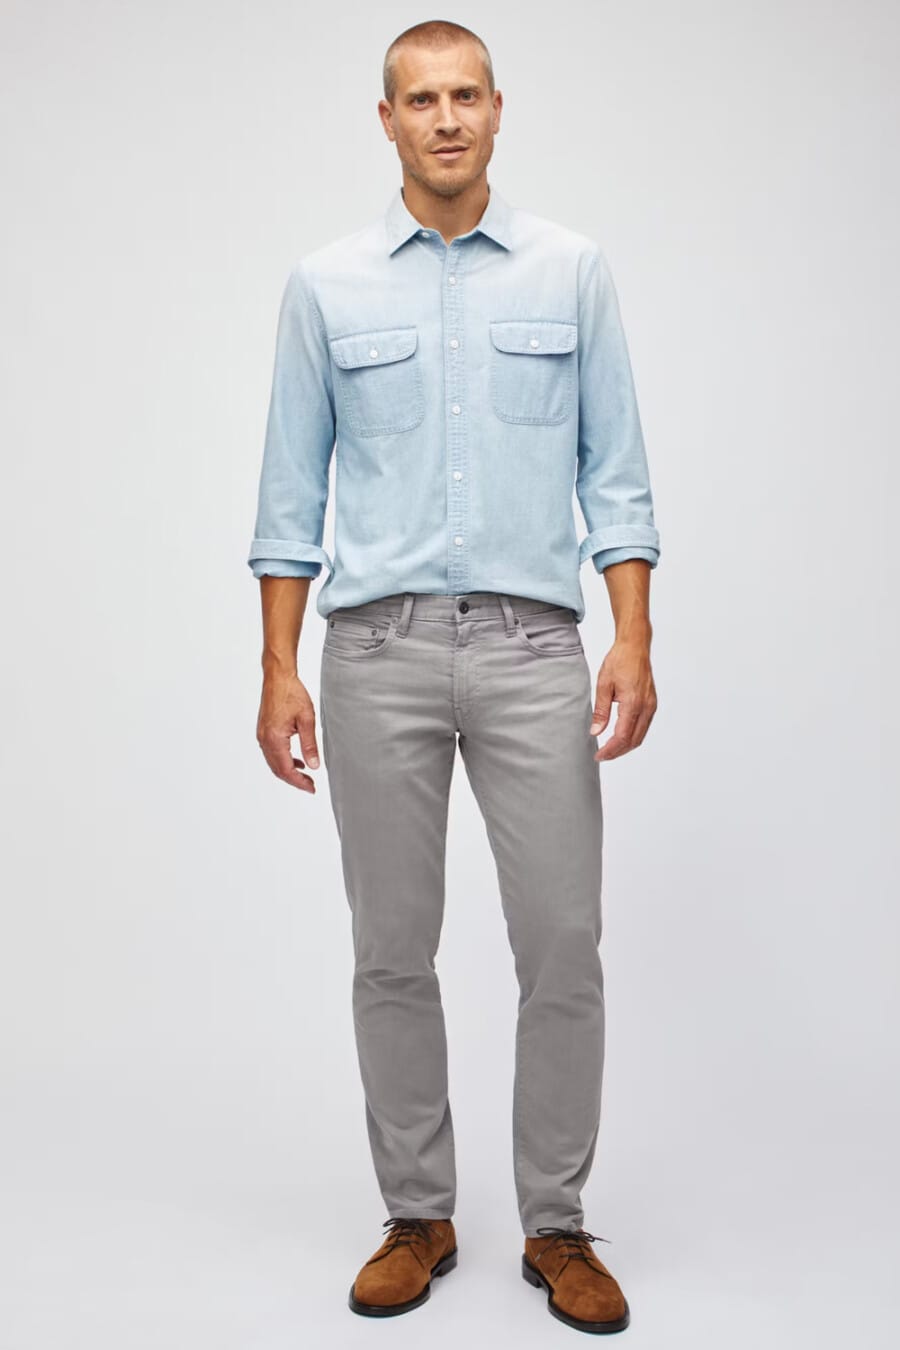 Men's grey jeans, light blue denim shirt and brown suede Derby shoes outfit